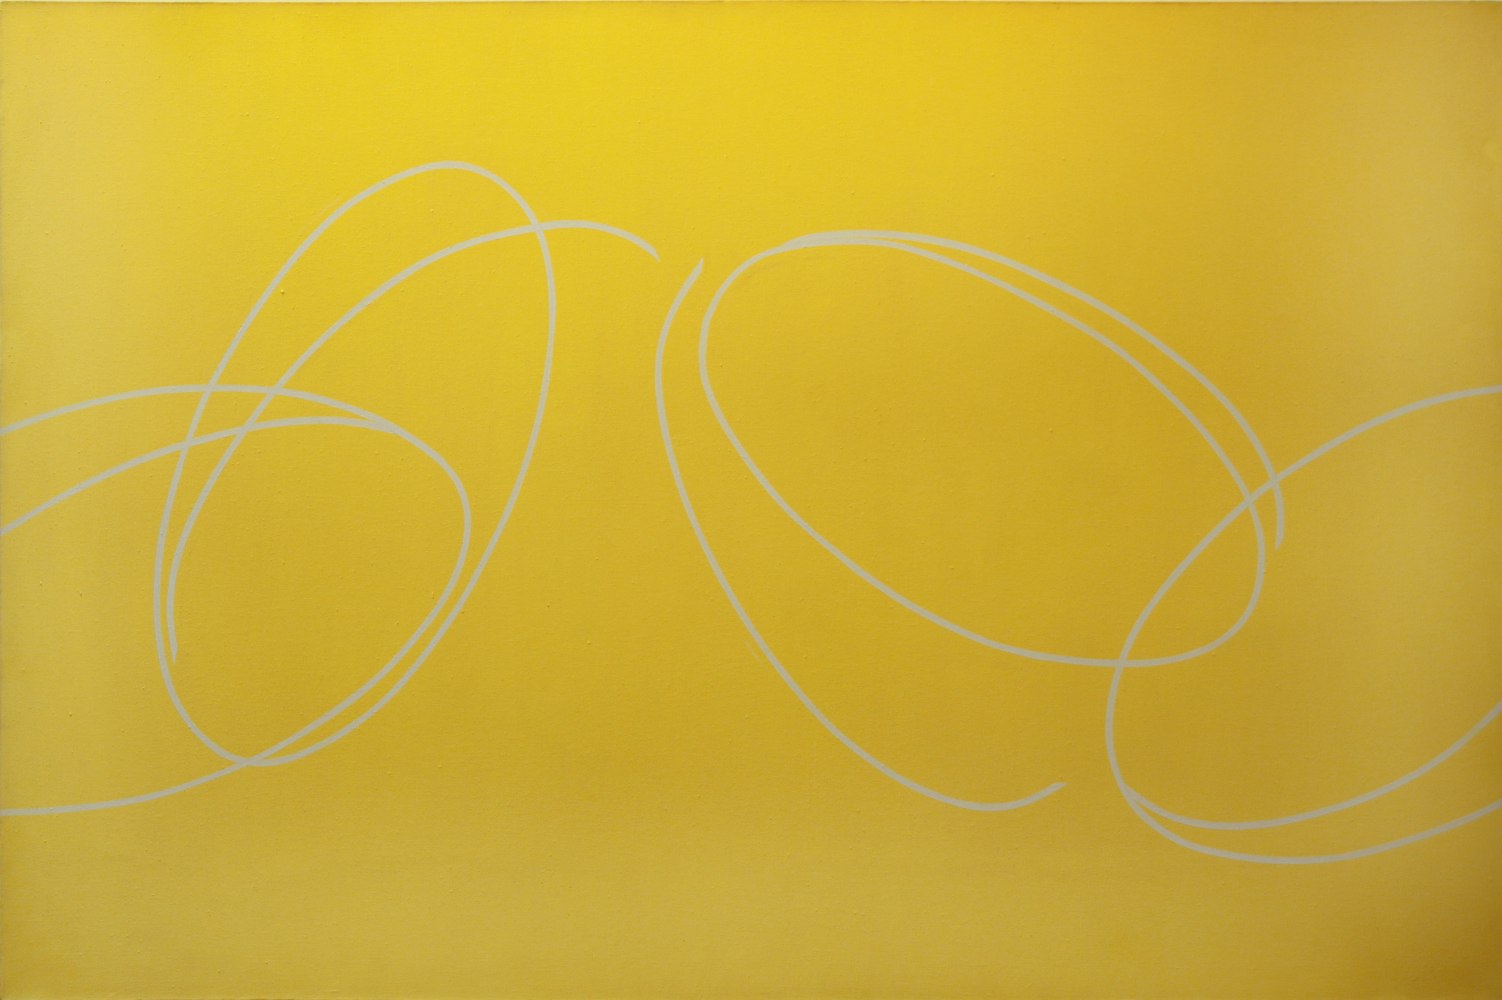 June Harwood (1933-2015)

Loop (yellow, lavender), 1966

acrylic on canvas

40 x 60 inches; 101.6 x 152.4 centimeters

LSFA# 1471&amp;nbsp;&amp;nbsp;&amp;nbsp;&amp;nbsp;&amp;nbsp;&amp;nbsp;&amp;nbsp;&amp;nbsp;&amp;nbsp;&amp;nbsp;&amp;nbsp;&amp;nbsp;&amp;nbsp;